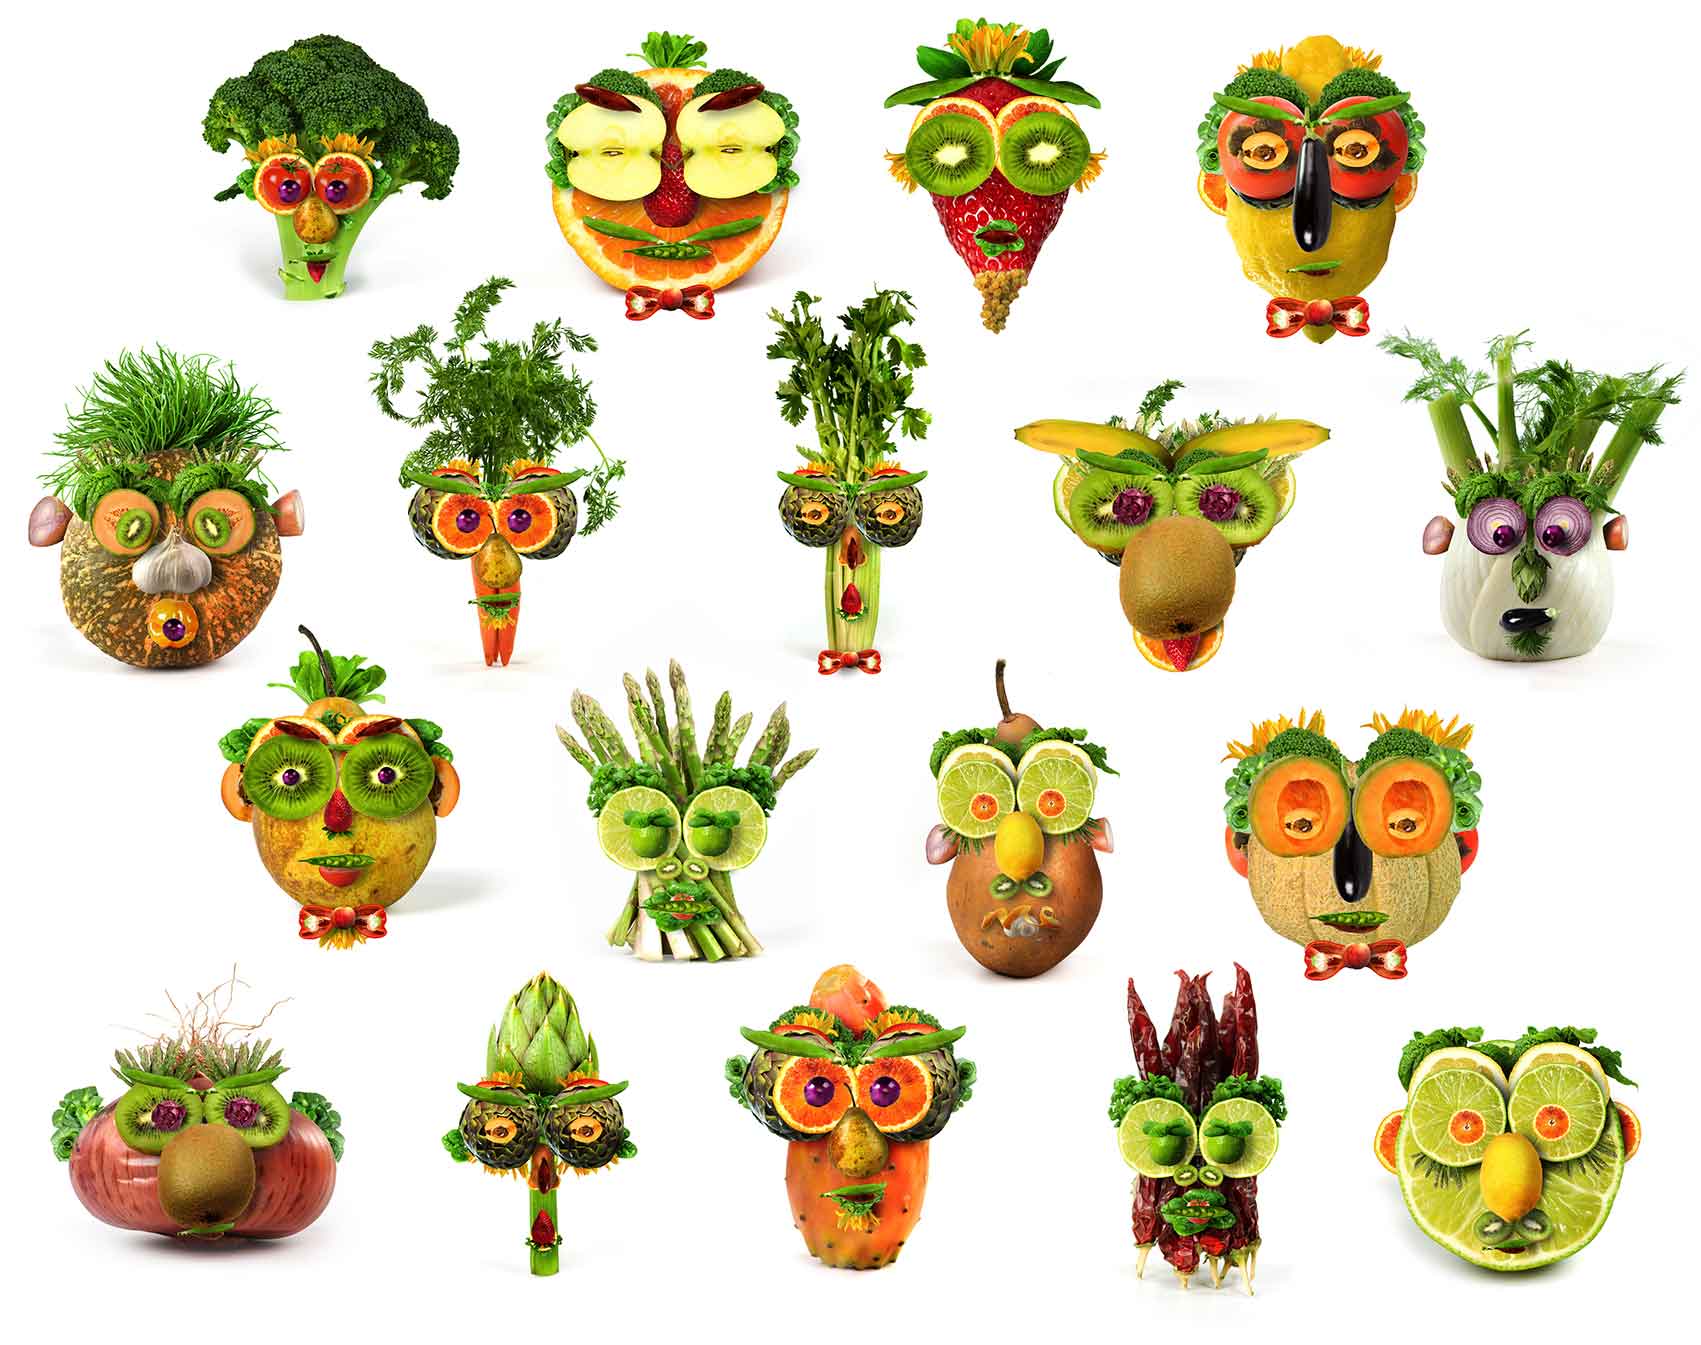 A collage of faces made from various fruit and vegetables.